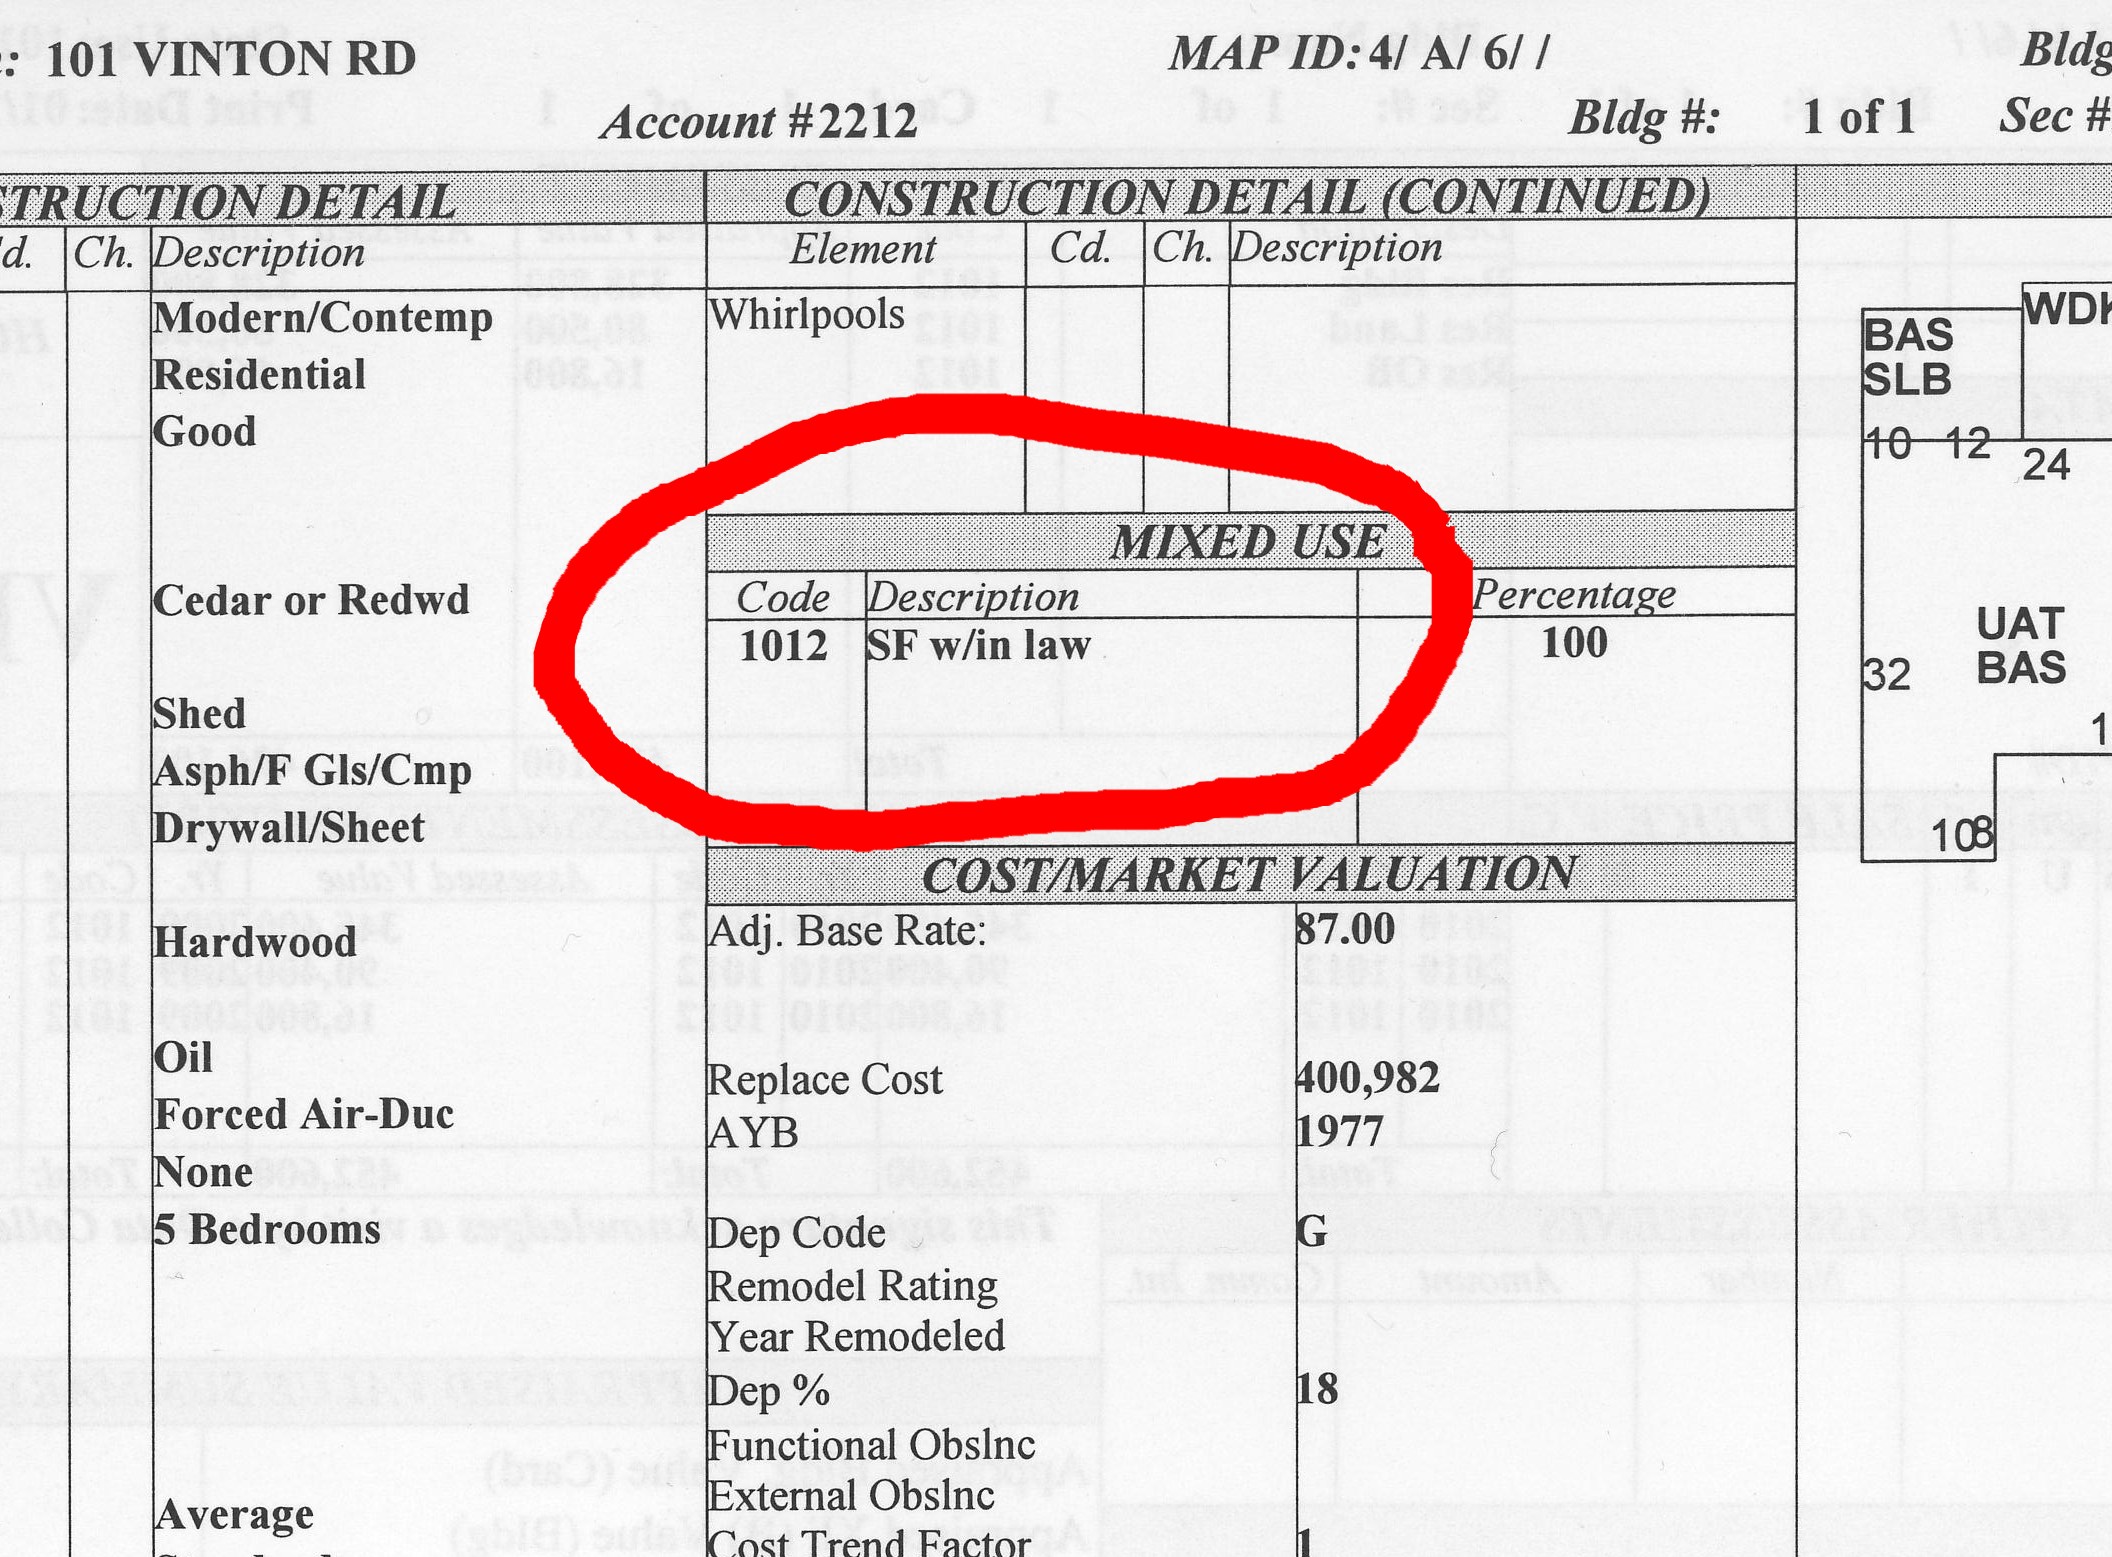 Detail of Wettlaufer ’s Property Record Card showing the listed “MIXED USE, SINGLE FAMILY with in law.”